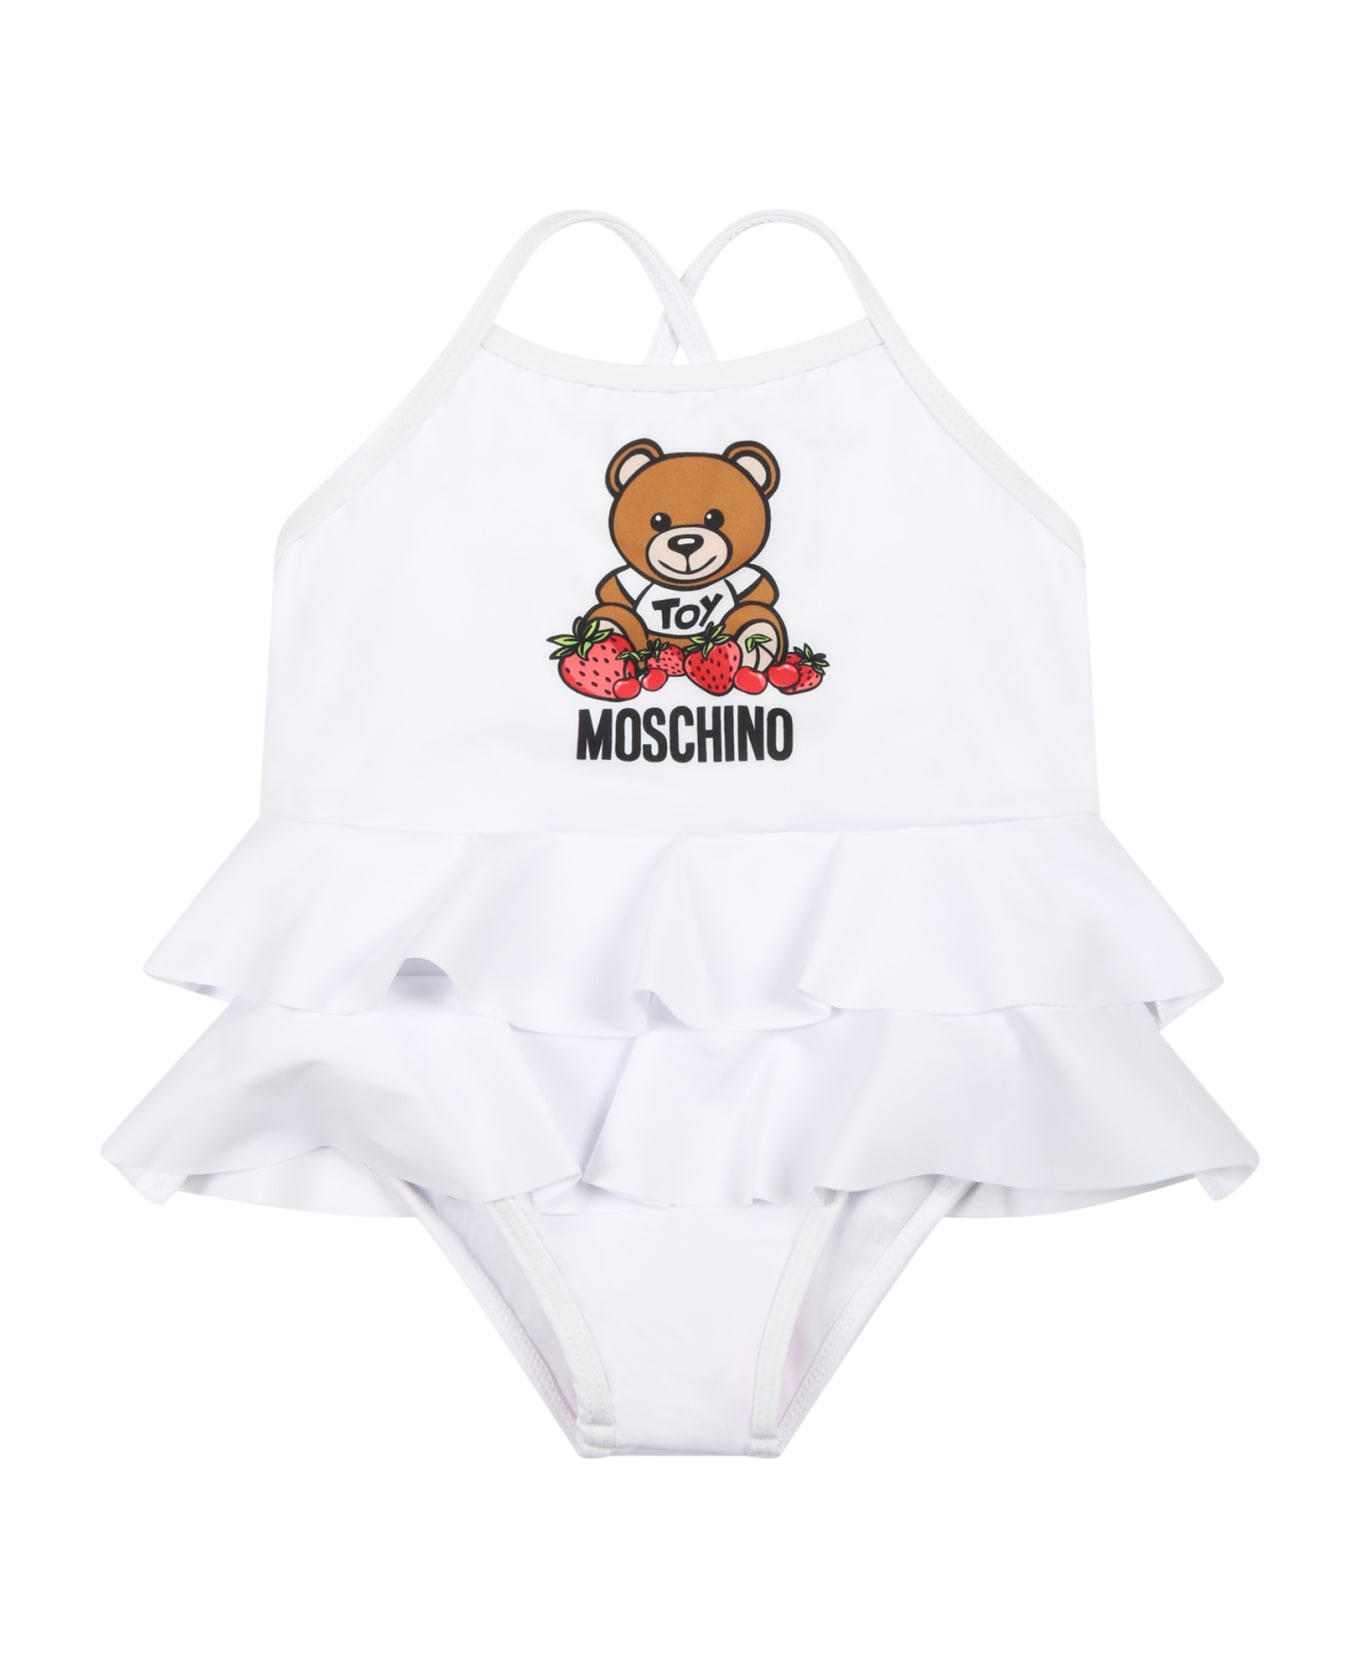 Moschino White Swimsuit For Baby Girl With Teddy Bear - White